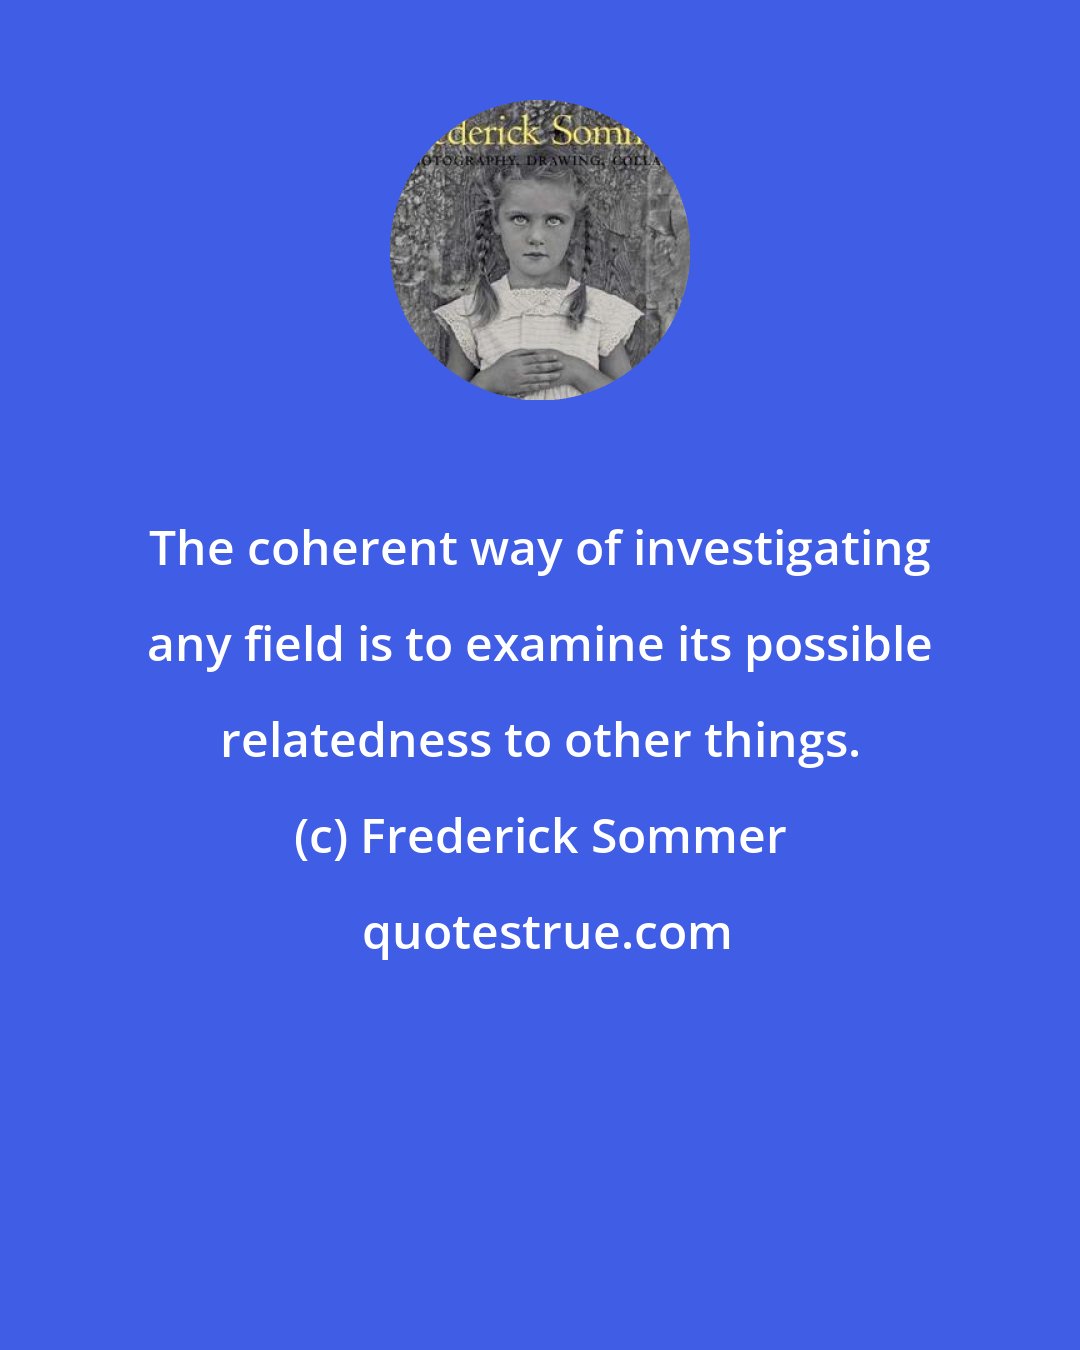 Frederick Sommer: The coherent way of investigating any field is to examine its possible relatedness to other things.